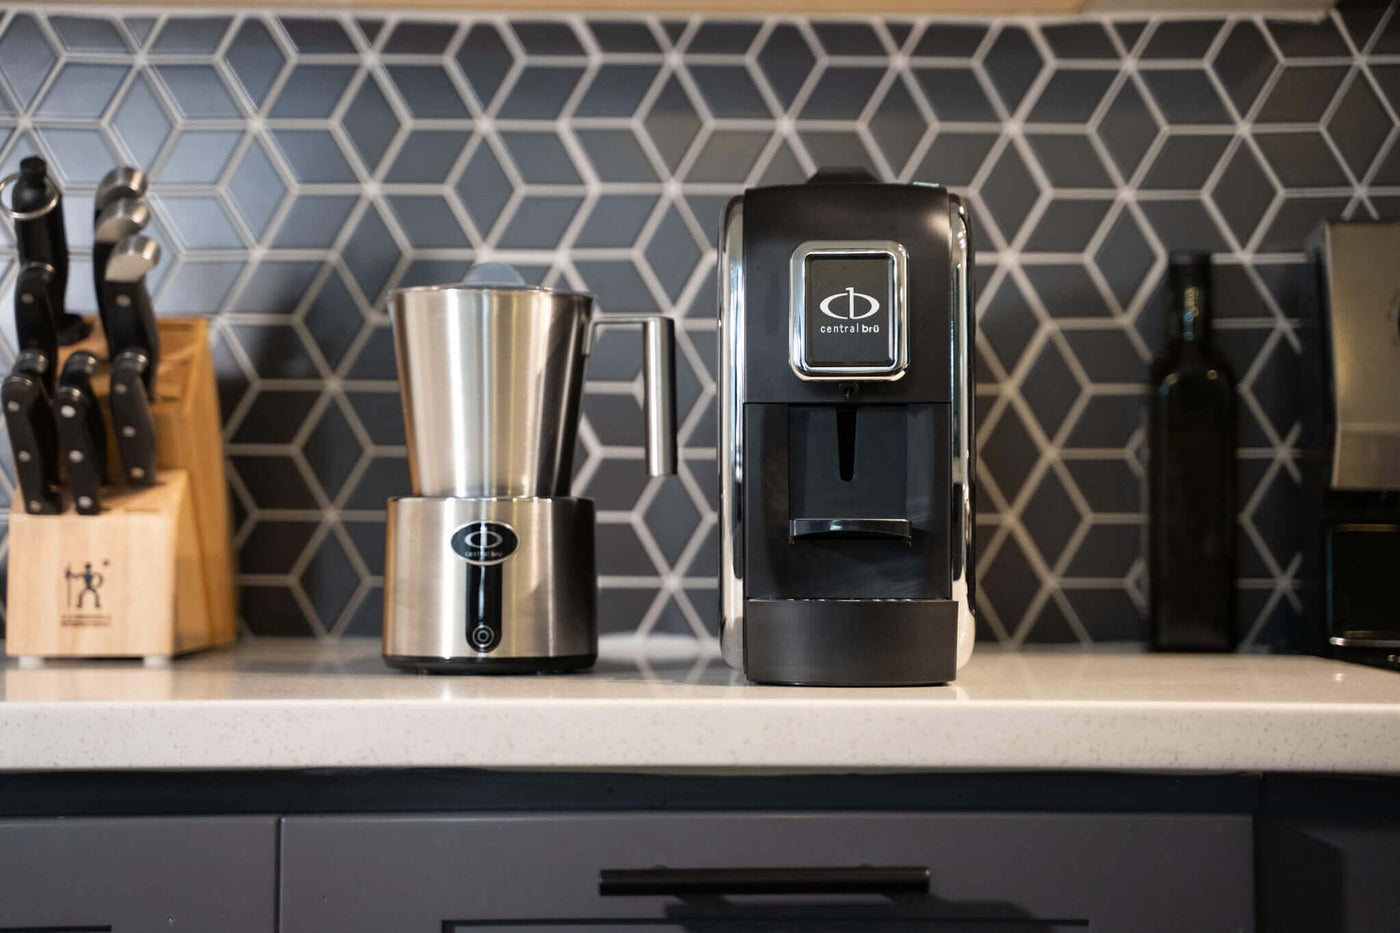 Central Bru espresso brewing system with Central Bru milk frother on a white kitchen counter with grey cabinetry all compliment each other as the espresso brewing system is matte black with chrome sides and the milk frother is full stainless steel